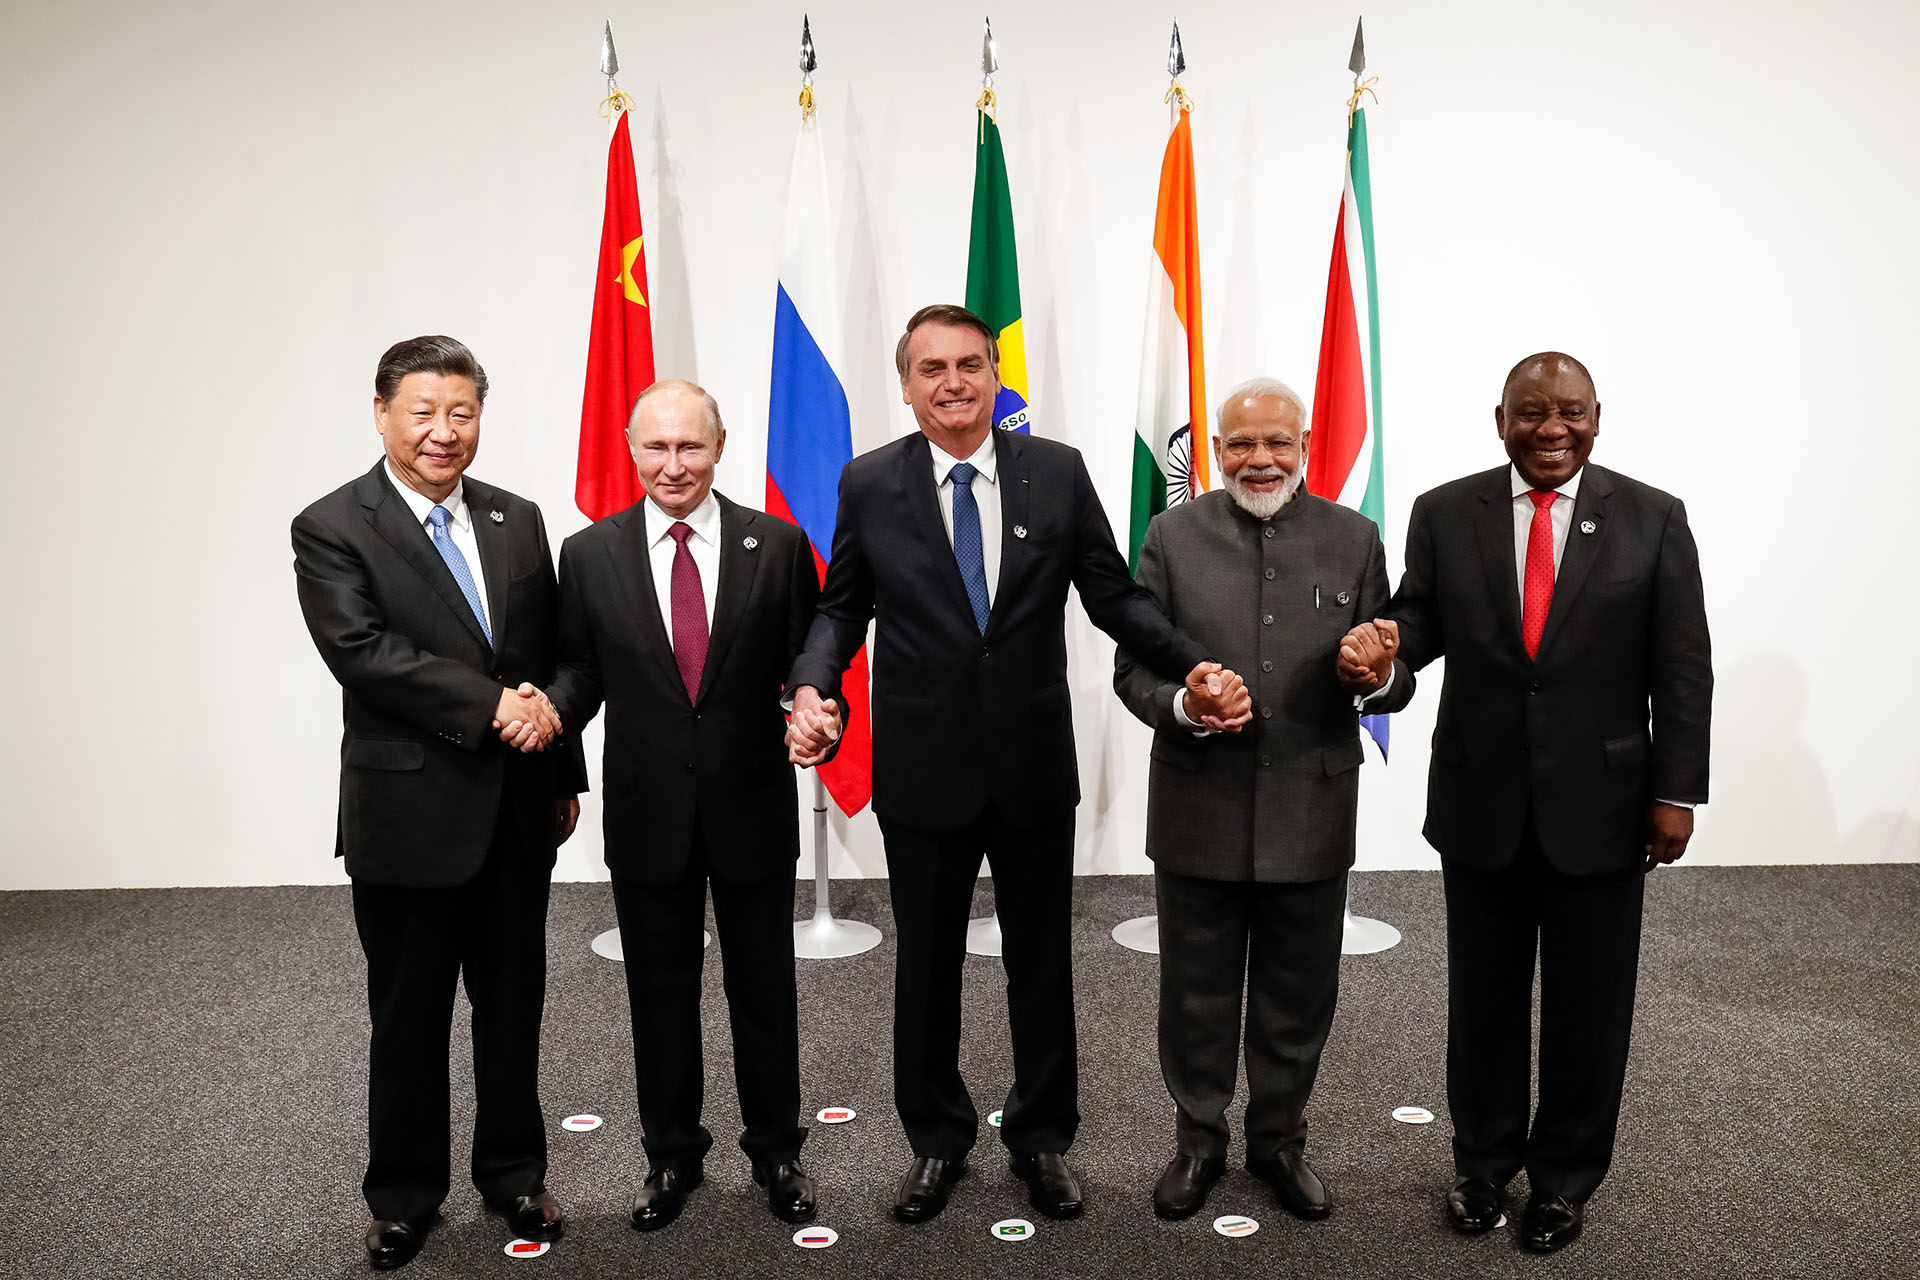 leaders of BRICS at the 2019 G20 Osaka summit standing together in an informal  group